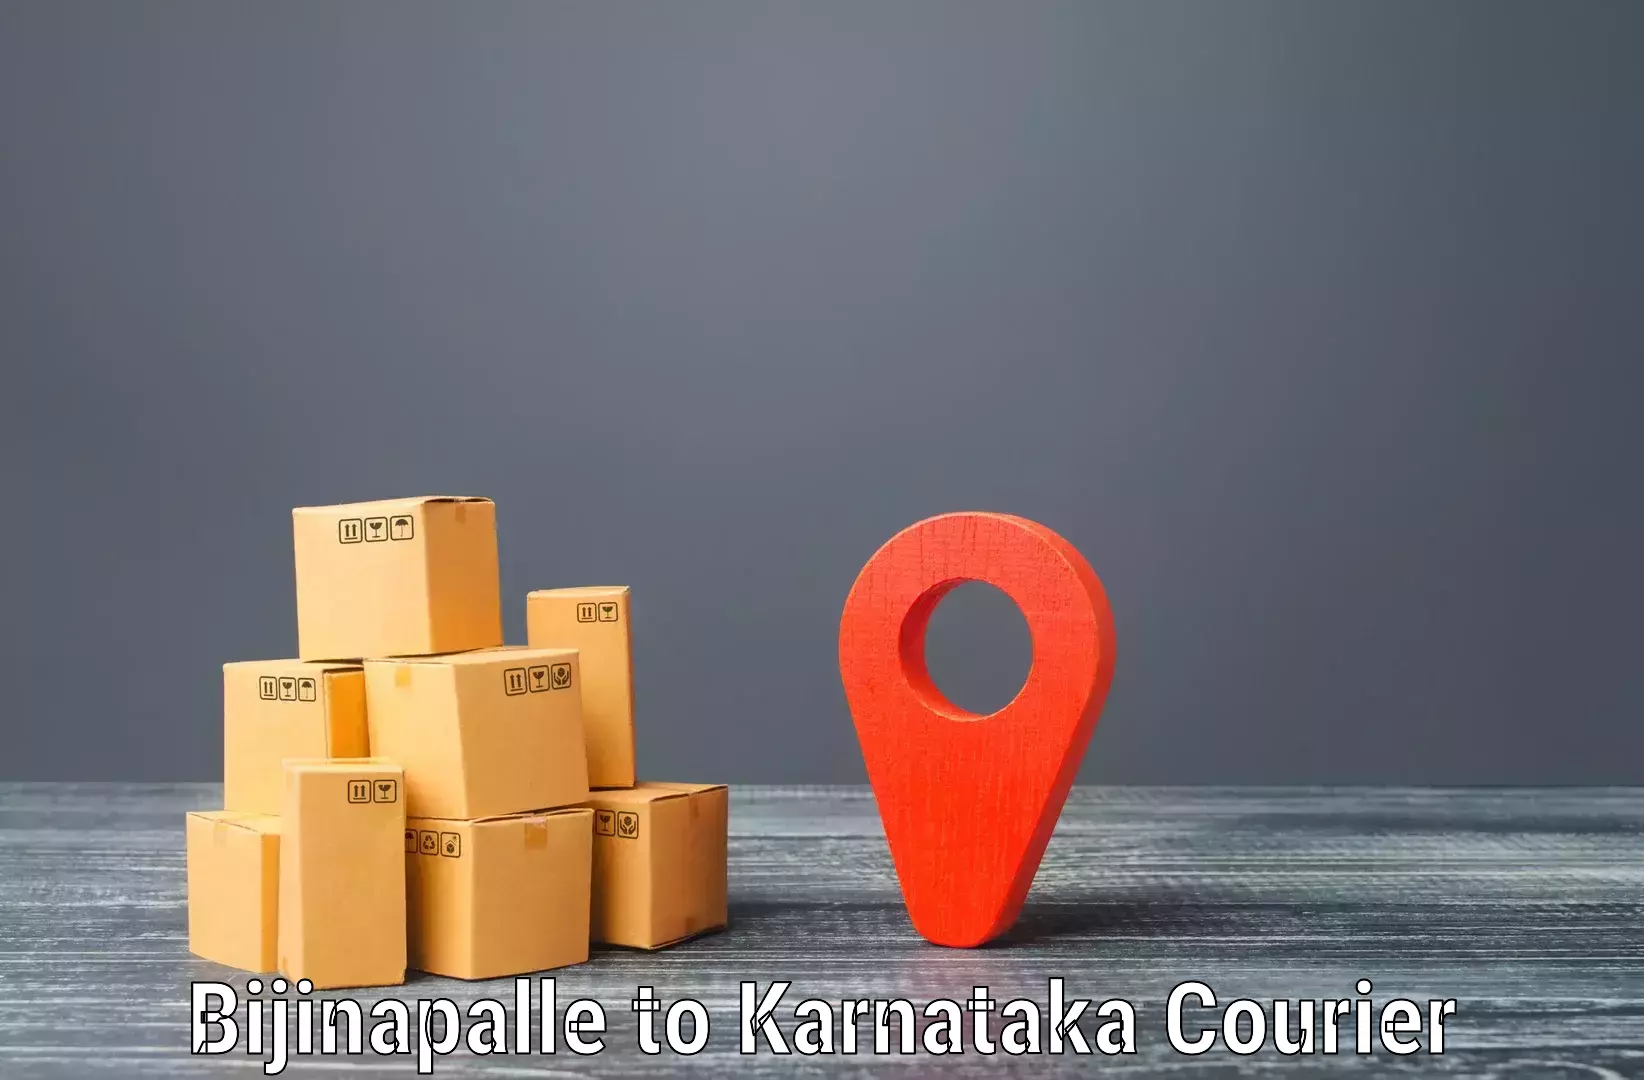 Reliable delivery network Bijinapalle to Ramanathapura